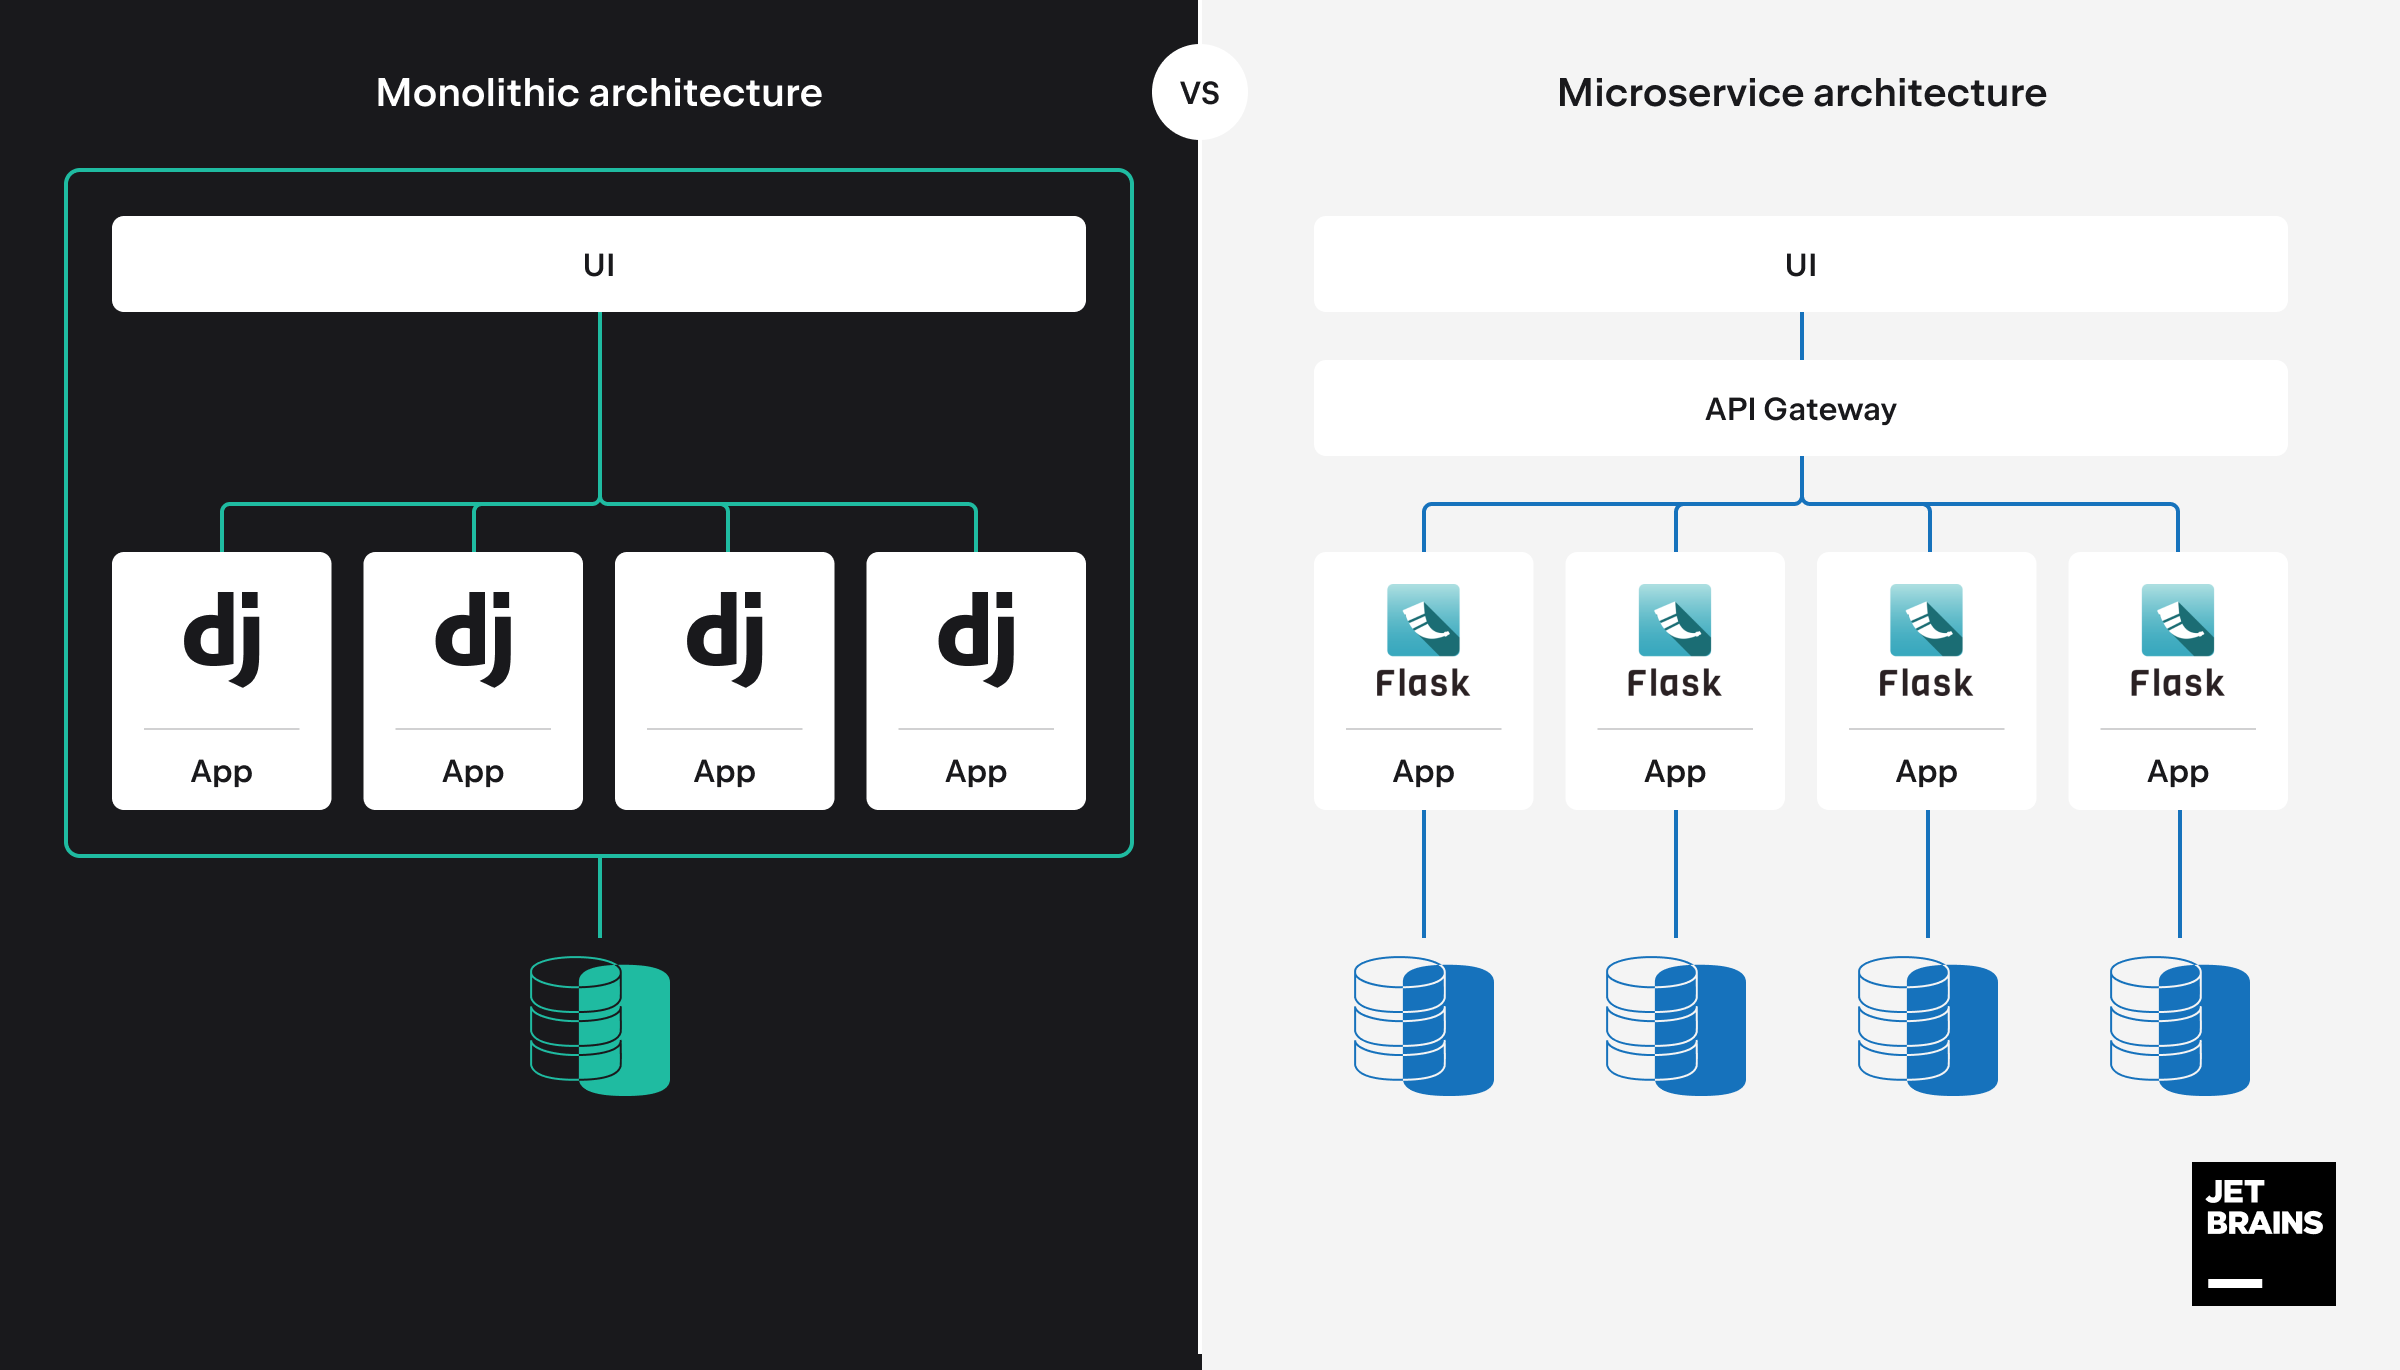 Monolith with Django vs Microservices with Flask